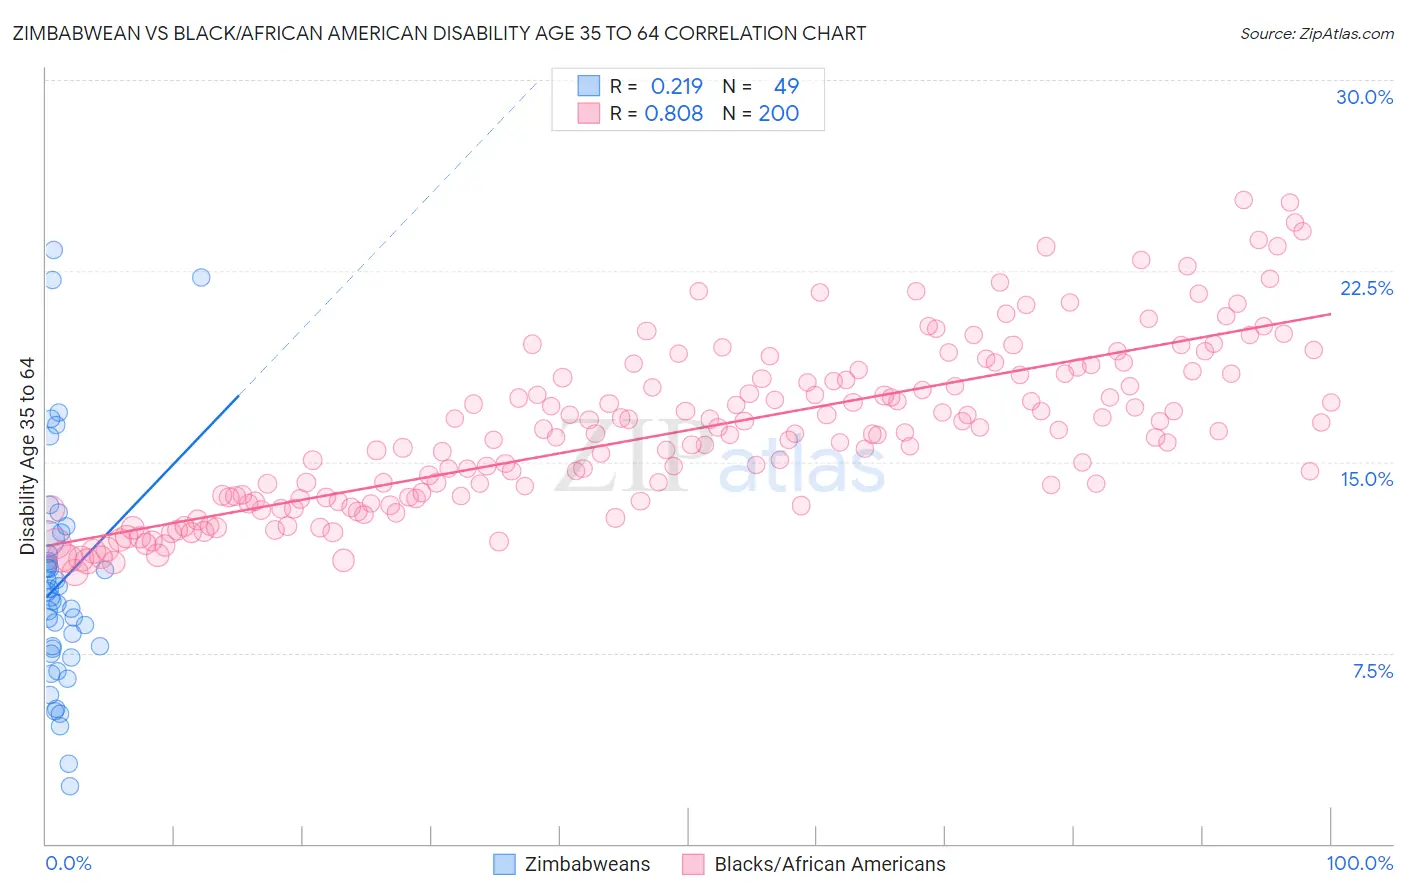 Zimbabwean vs Black/African American Disability Age 35 to 64